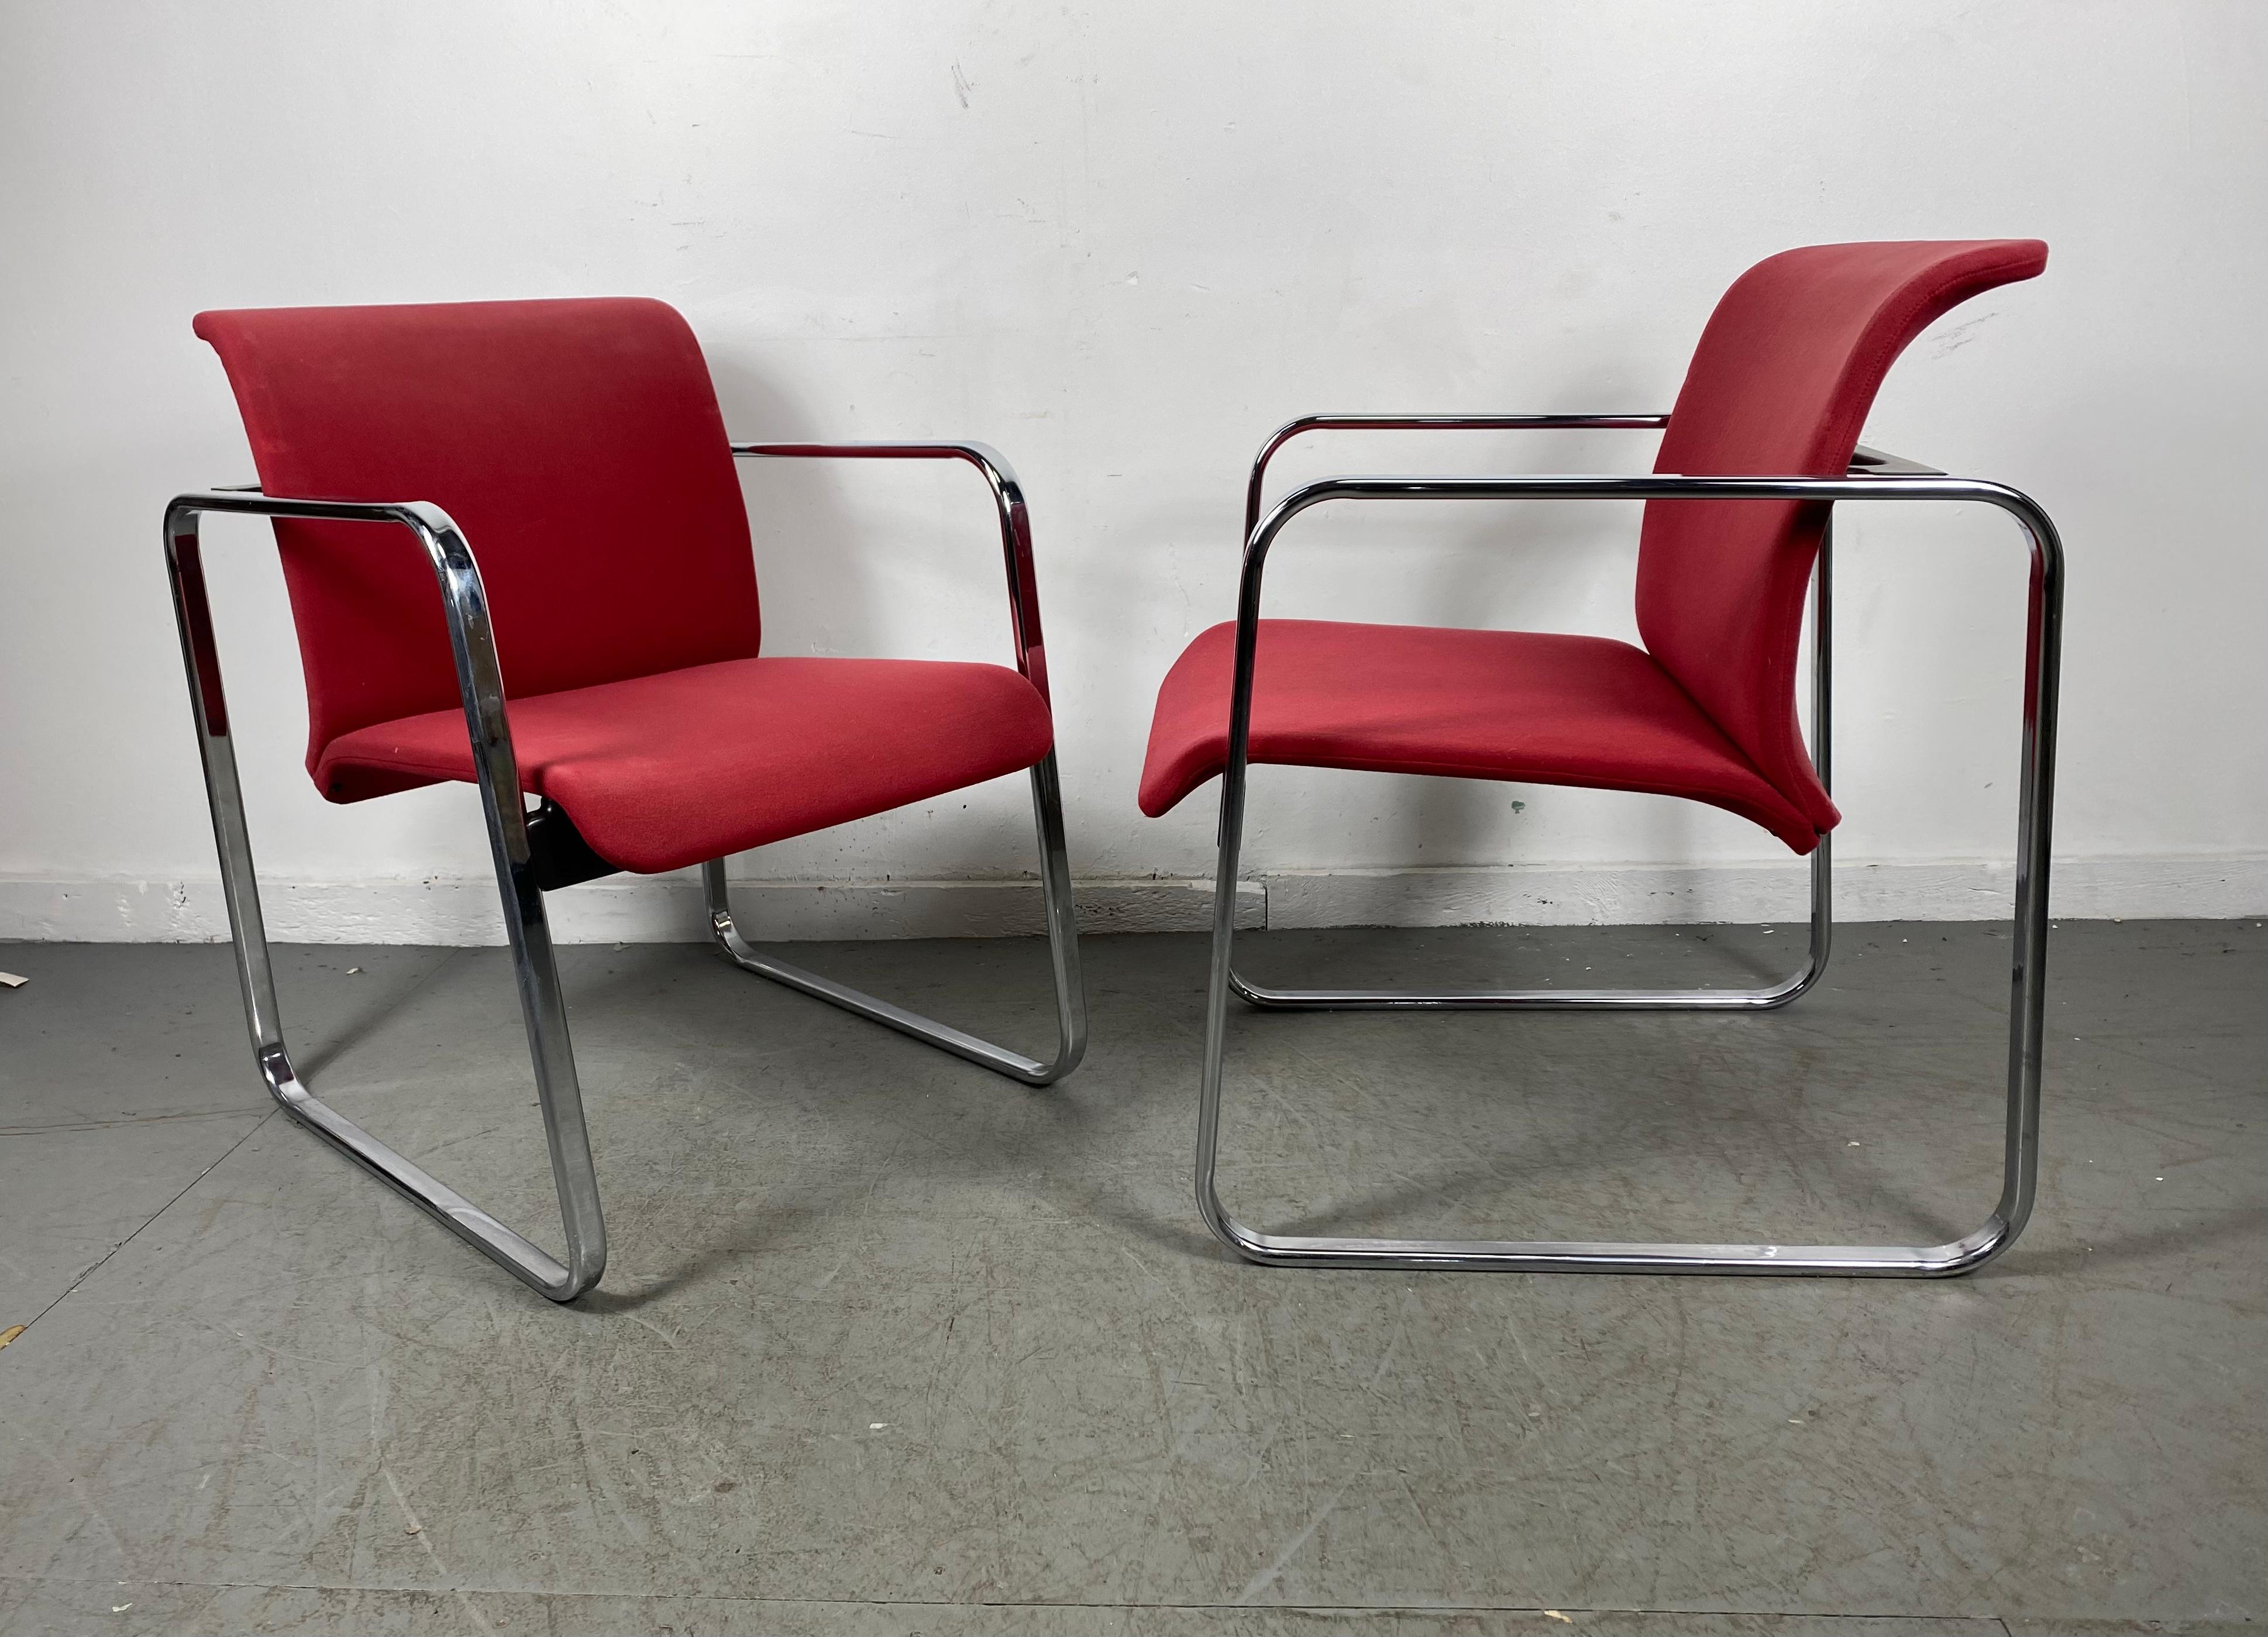 Steel Modernist Fabric & Chrome Tubular Chairs by Peter Protzman for Herman Miller For Sale